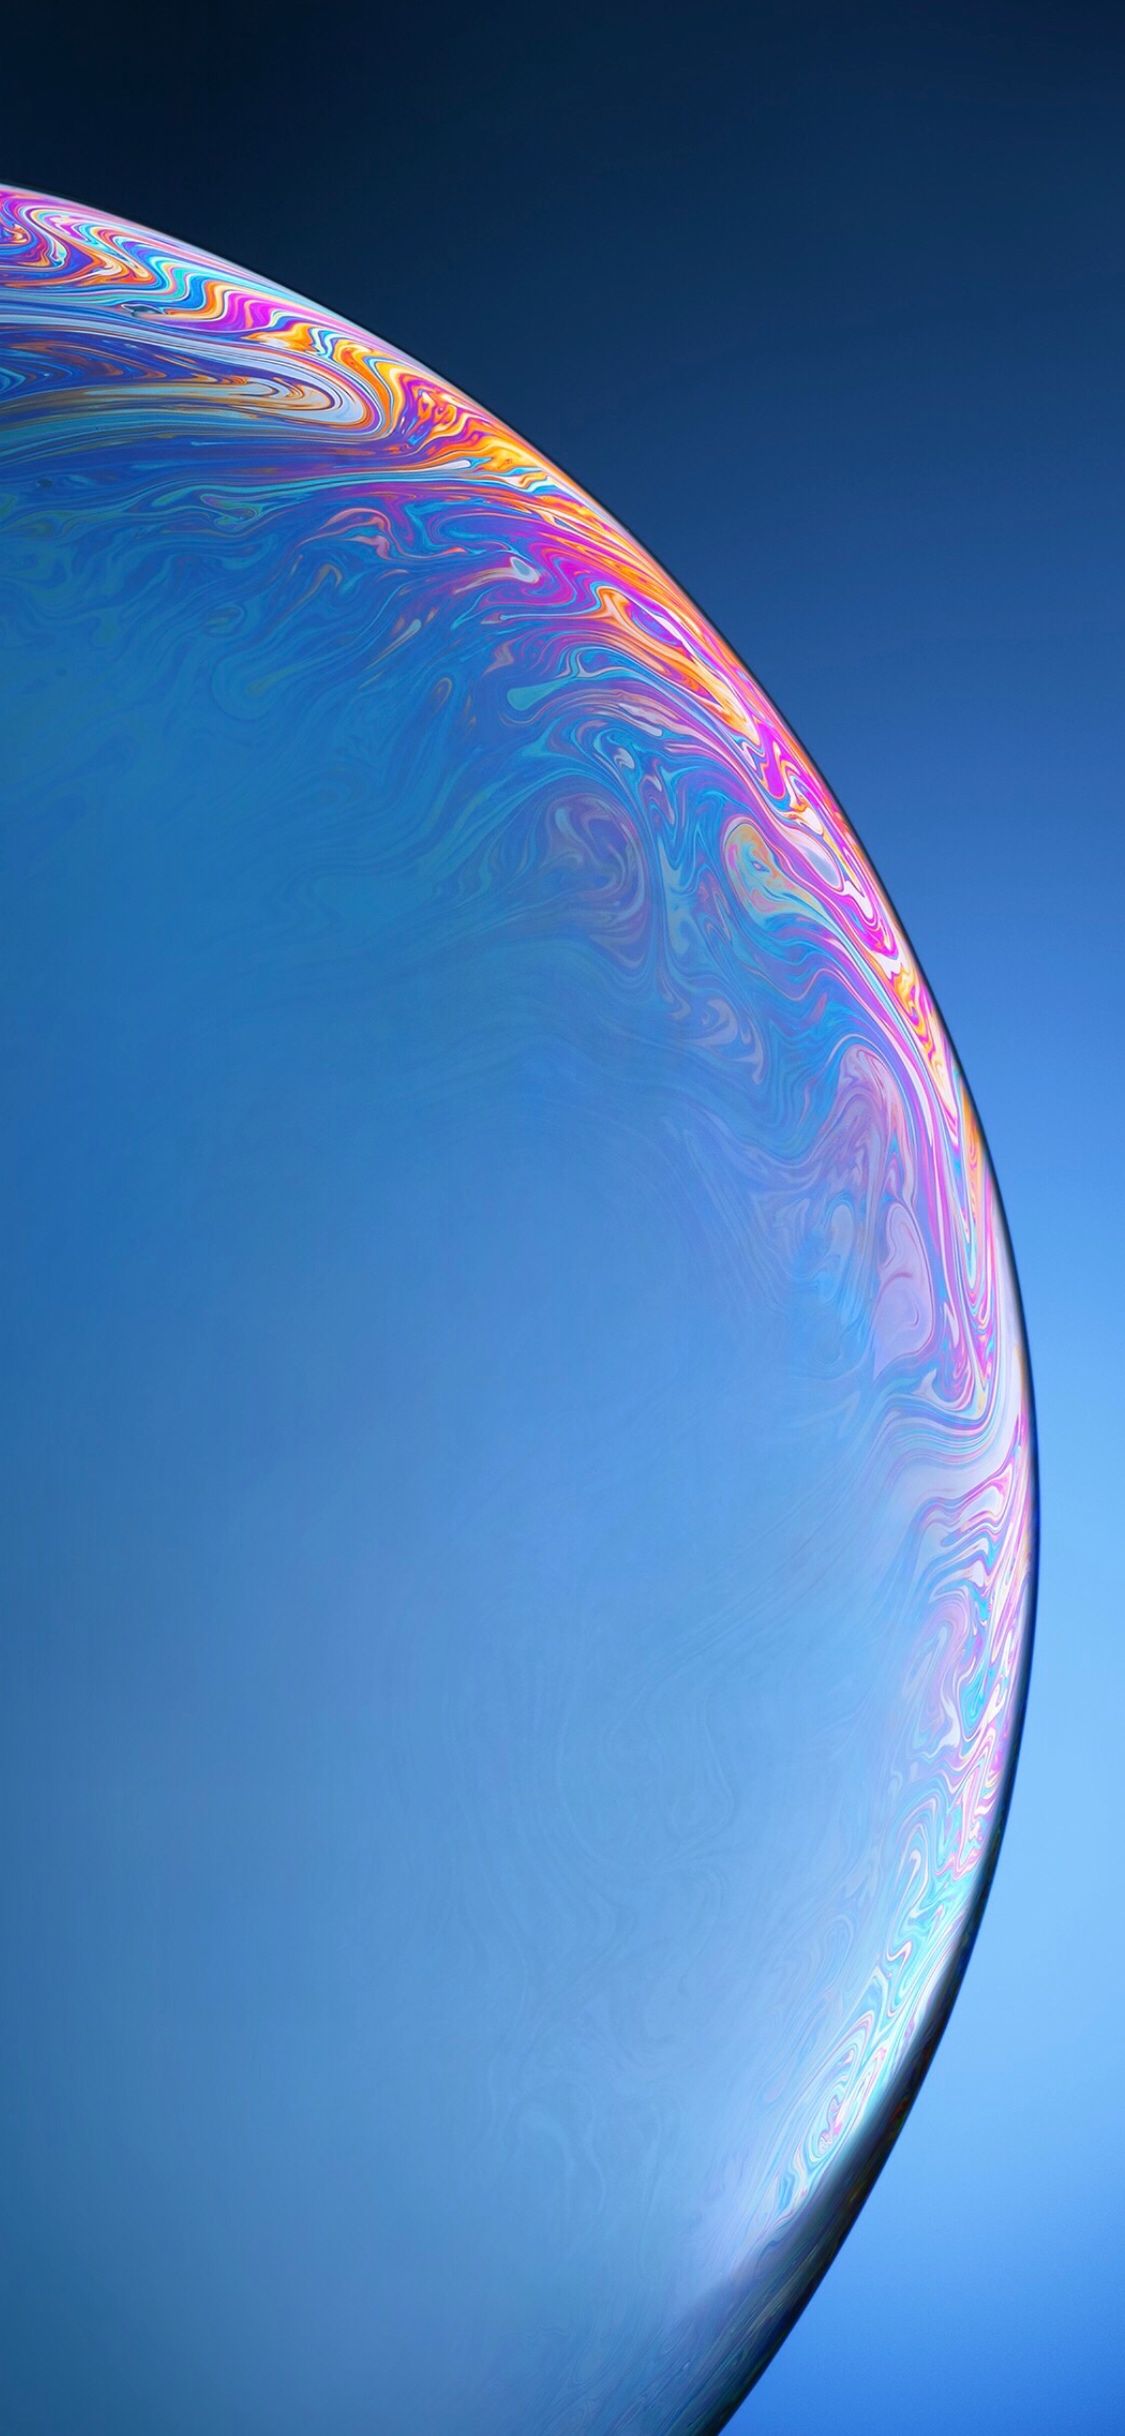 iPhone X Wallpapers: 35 Great Images For An AMOLED Screen